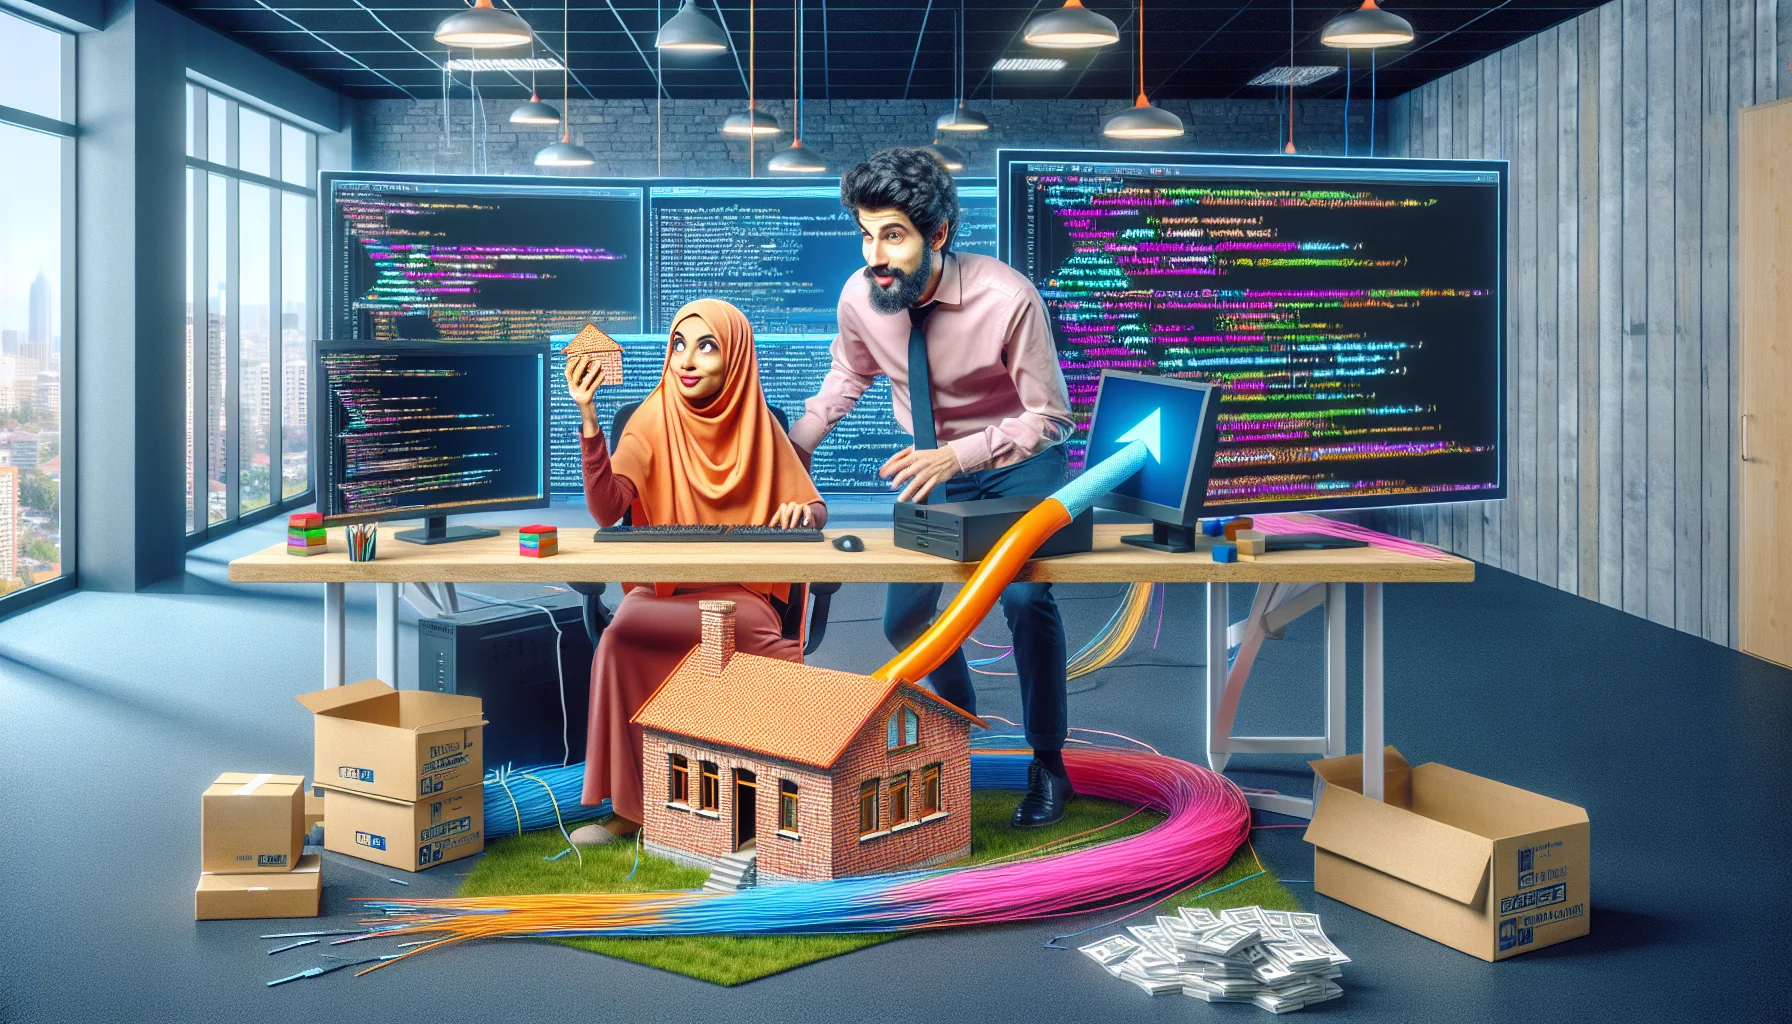 Create an imaginative scenario: A Middle-Eastern woman and a Caucasian man, both programmers, are building the quintessential real estate website. They hustle and bustle in a brightly lit office space surrounded by monitors displaying colorful coding. In a humorous twist, a physical brick house is being 'uploaded' into their system through a funnel connected to the desktop. Optical fiber cables strewn around reflect the enthralling feel of a makeshift construction zone. Behind them, a sign reads 'Real Estate Web Builders – where Infrastructure meets the Internet!'. The office backdrop symbolizes high-speed web hosting.